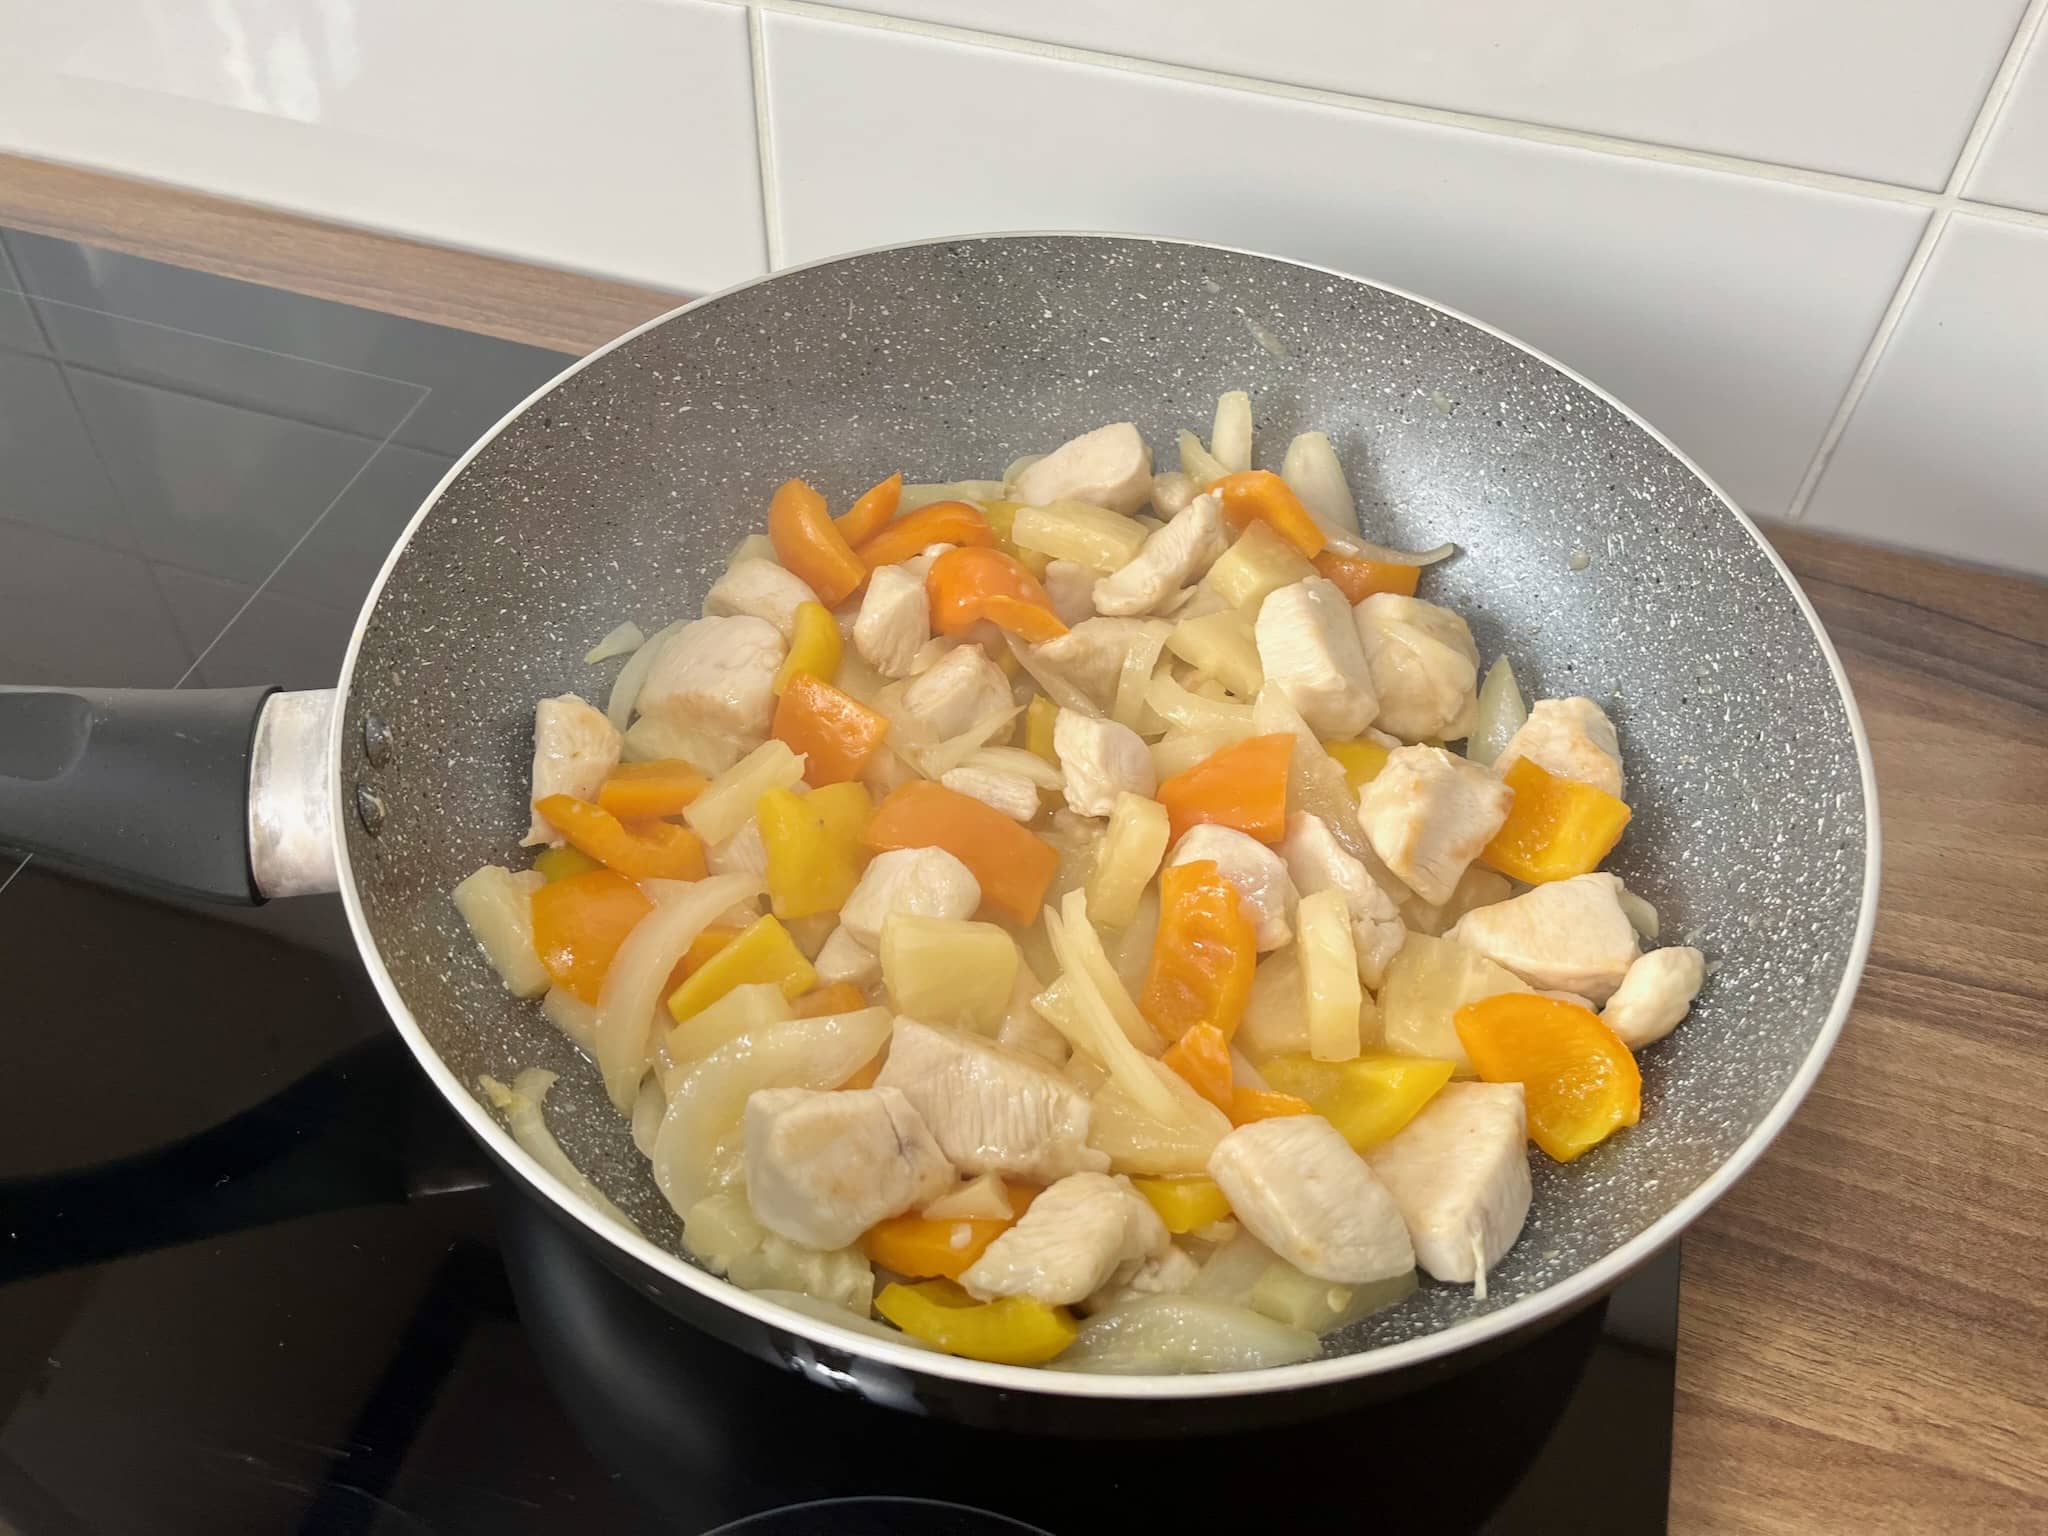 Chicken breasts and vegetables stir fry in a pan